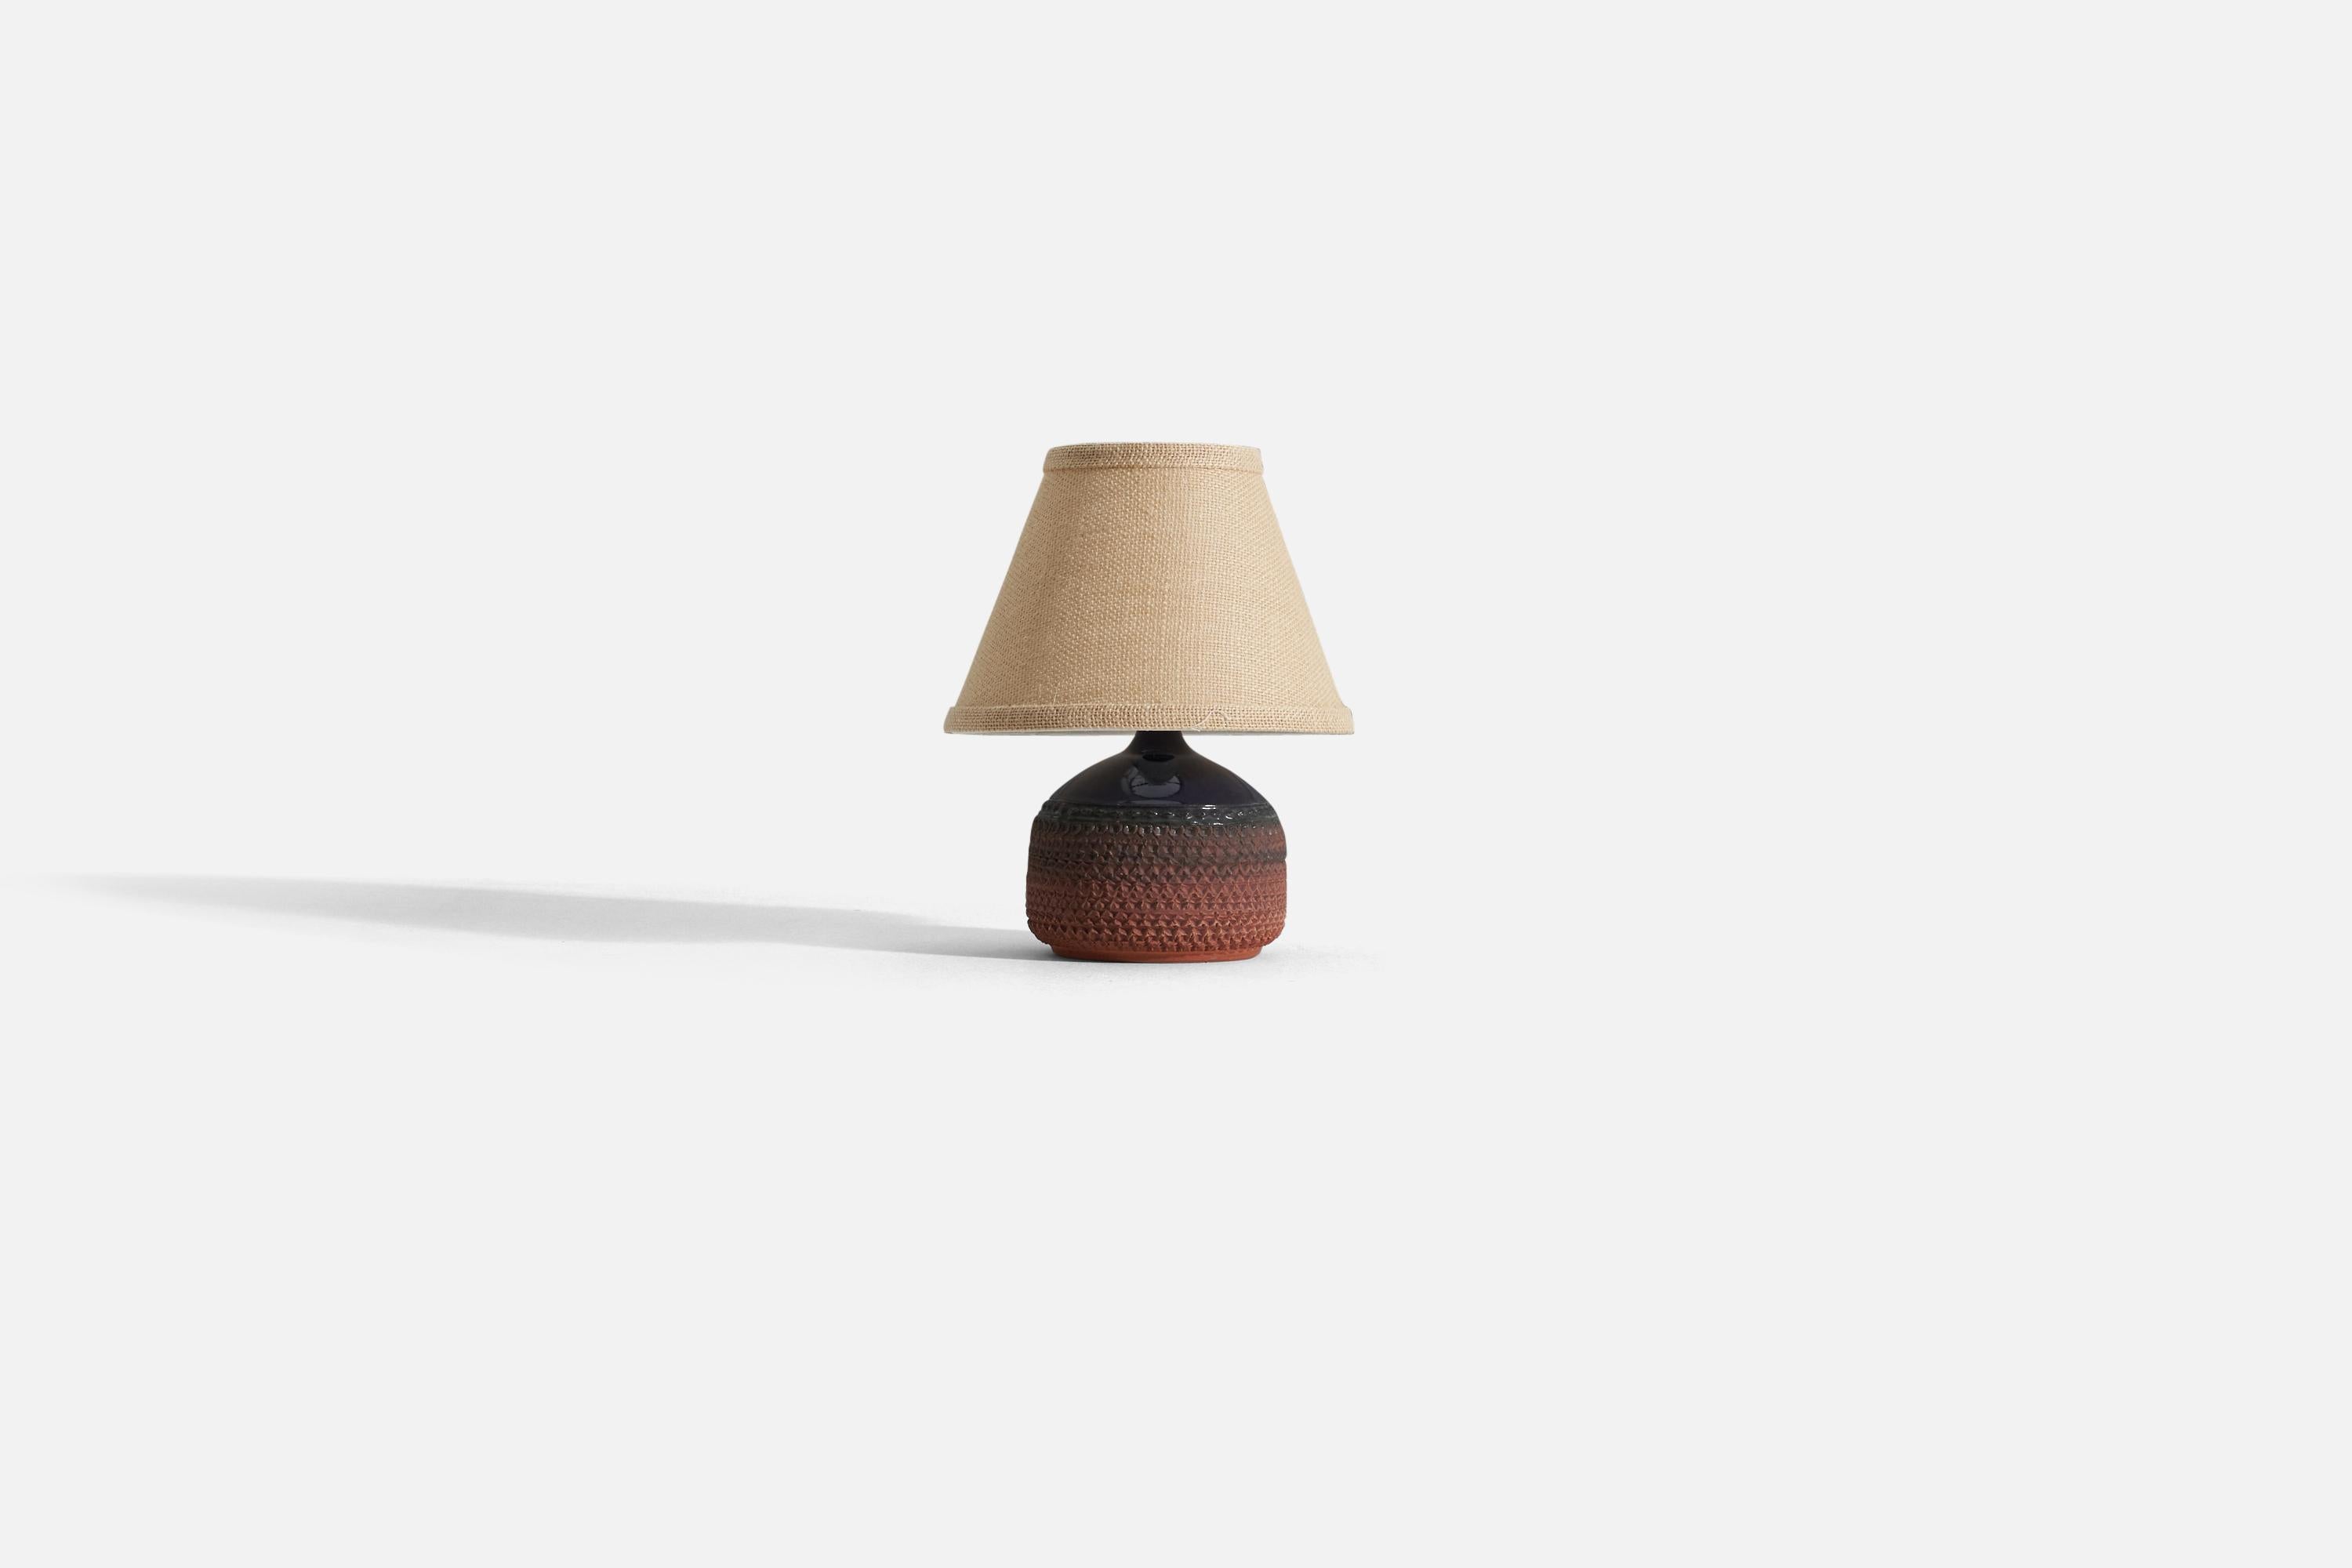 A black and red stoneware table lamp with simple incised decor by Klase Höganäs. Stamped.

Measurements listed are of the lamp itself. Sold without lampshade.
For reference:
Measurements of shade (inches): 4.25 x 8.25 x 6 (T x B x S)
Overall